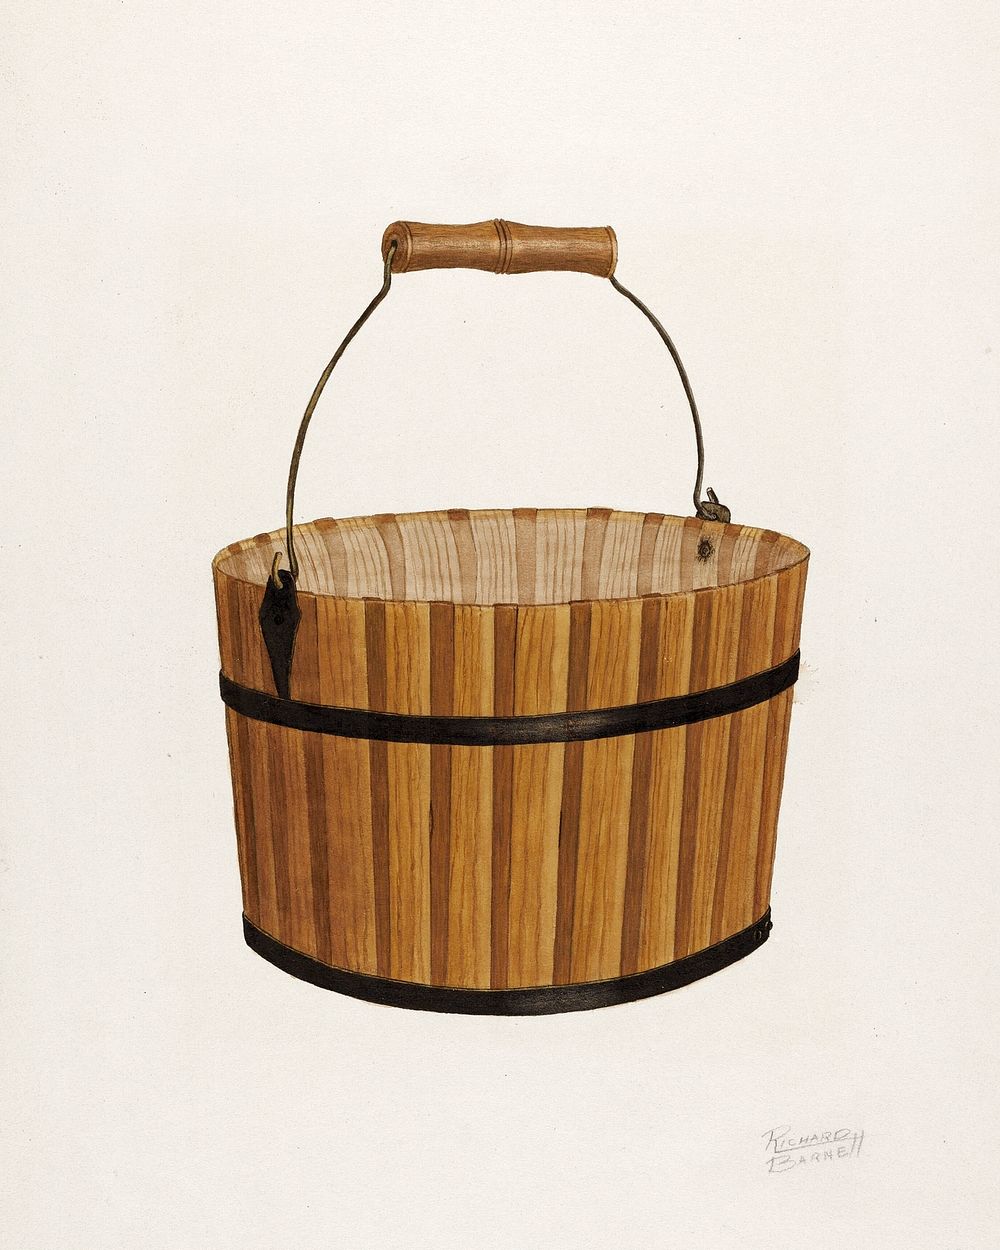 Shaker Wooden Bucket (1935&ndash;1942) by Eugene Barrell. Original from The National Gallery of Art. Digitally enhanced by…